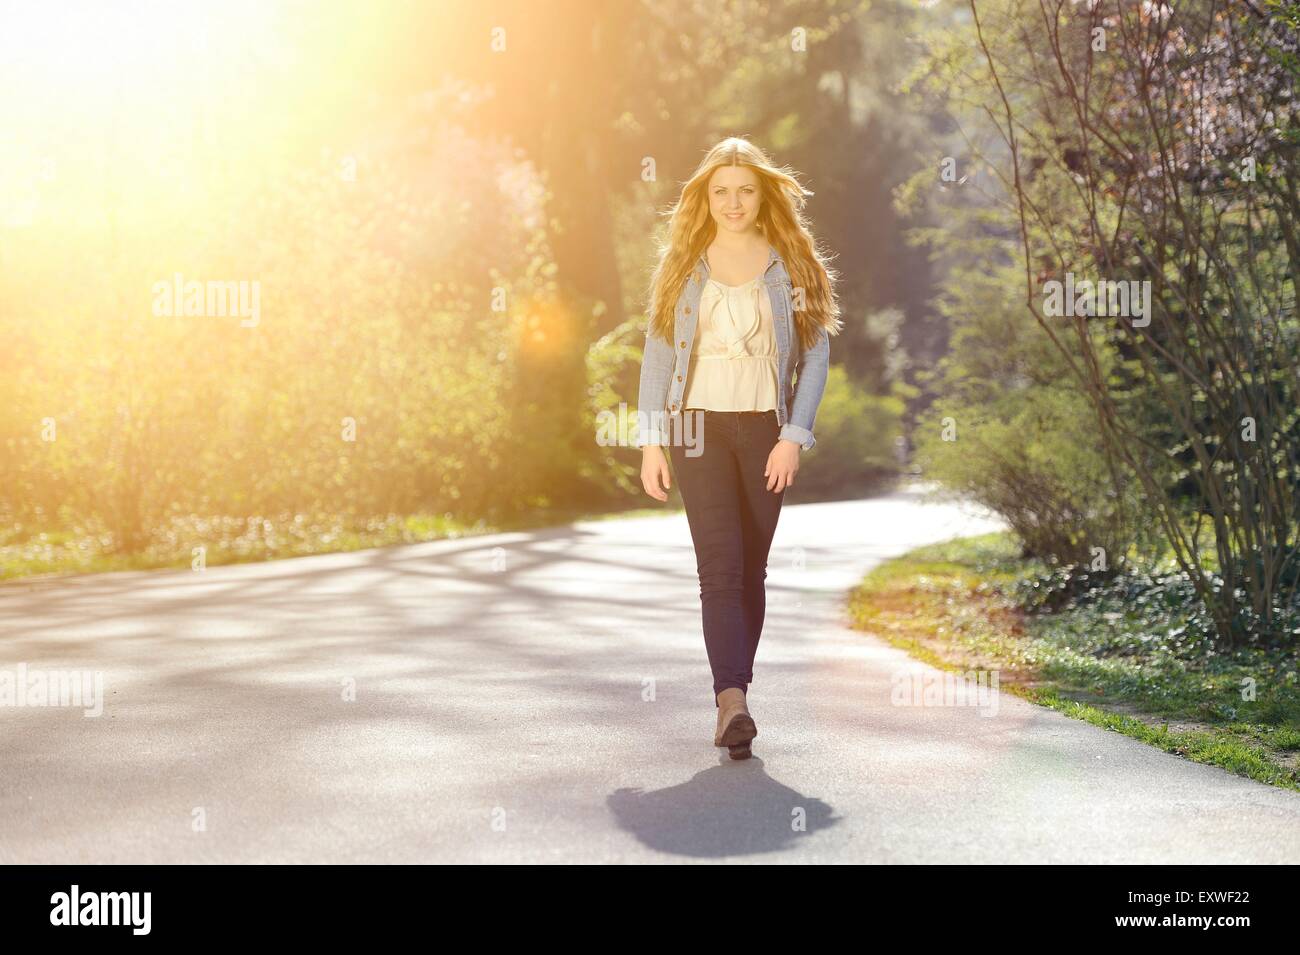 Young woman walking on path in park Banque D'Images